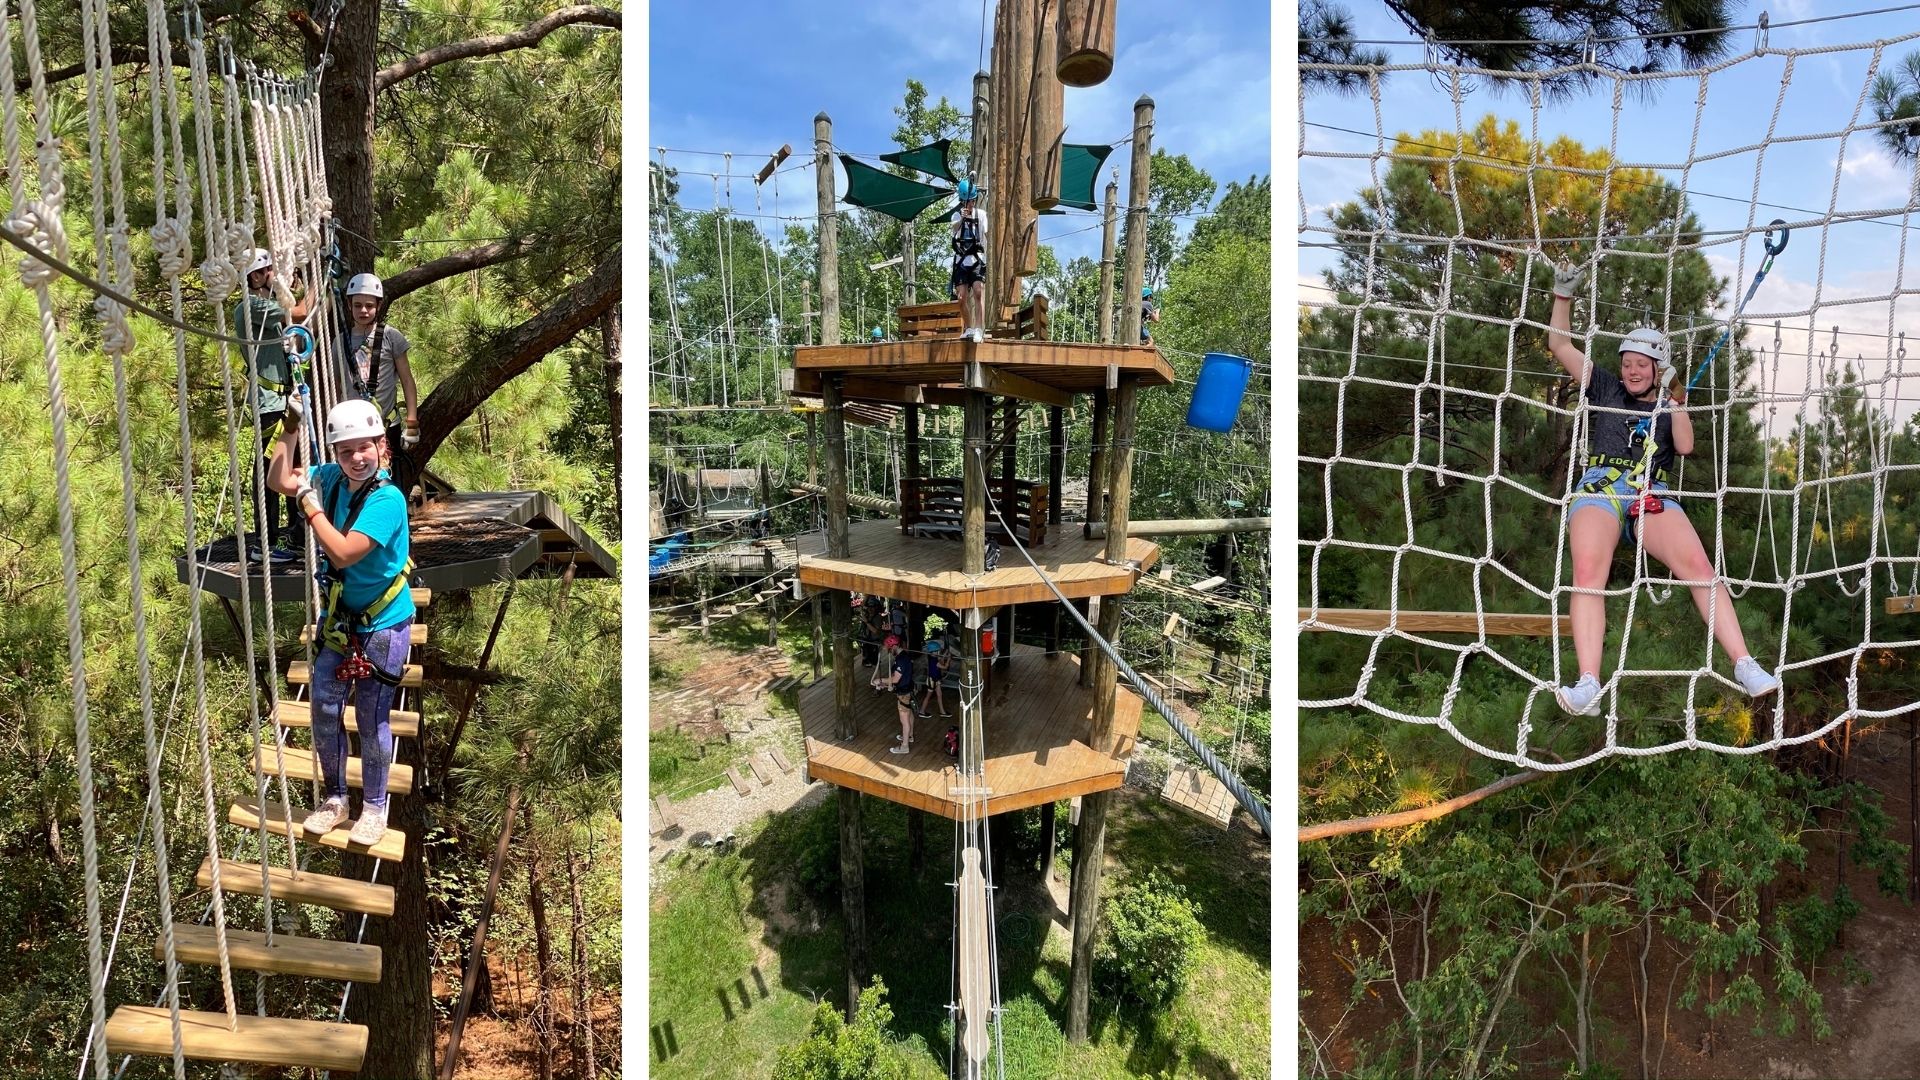 Try Ziplining or Tackle a Rope Course